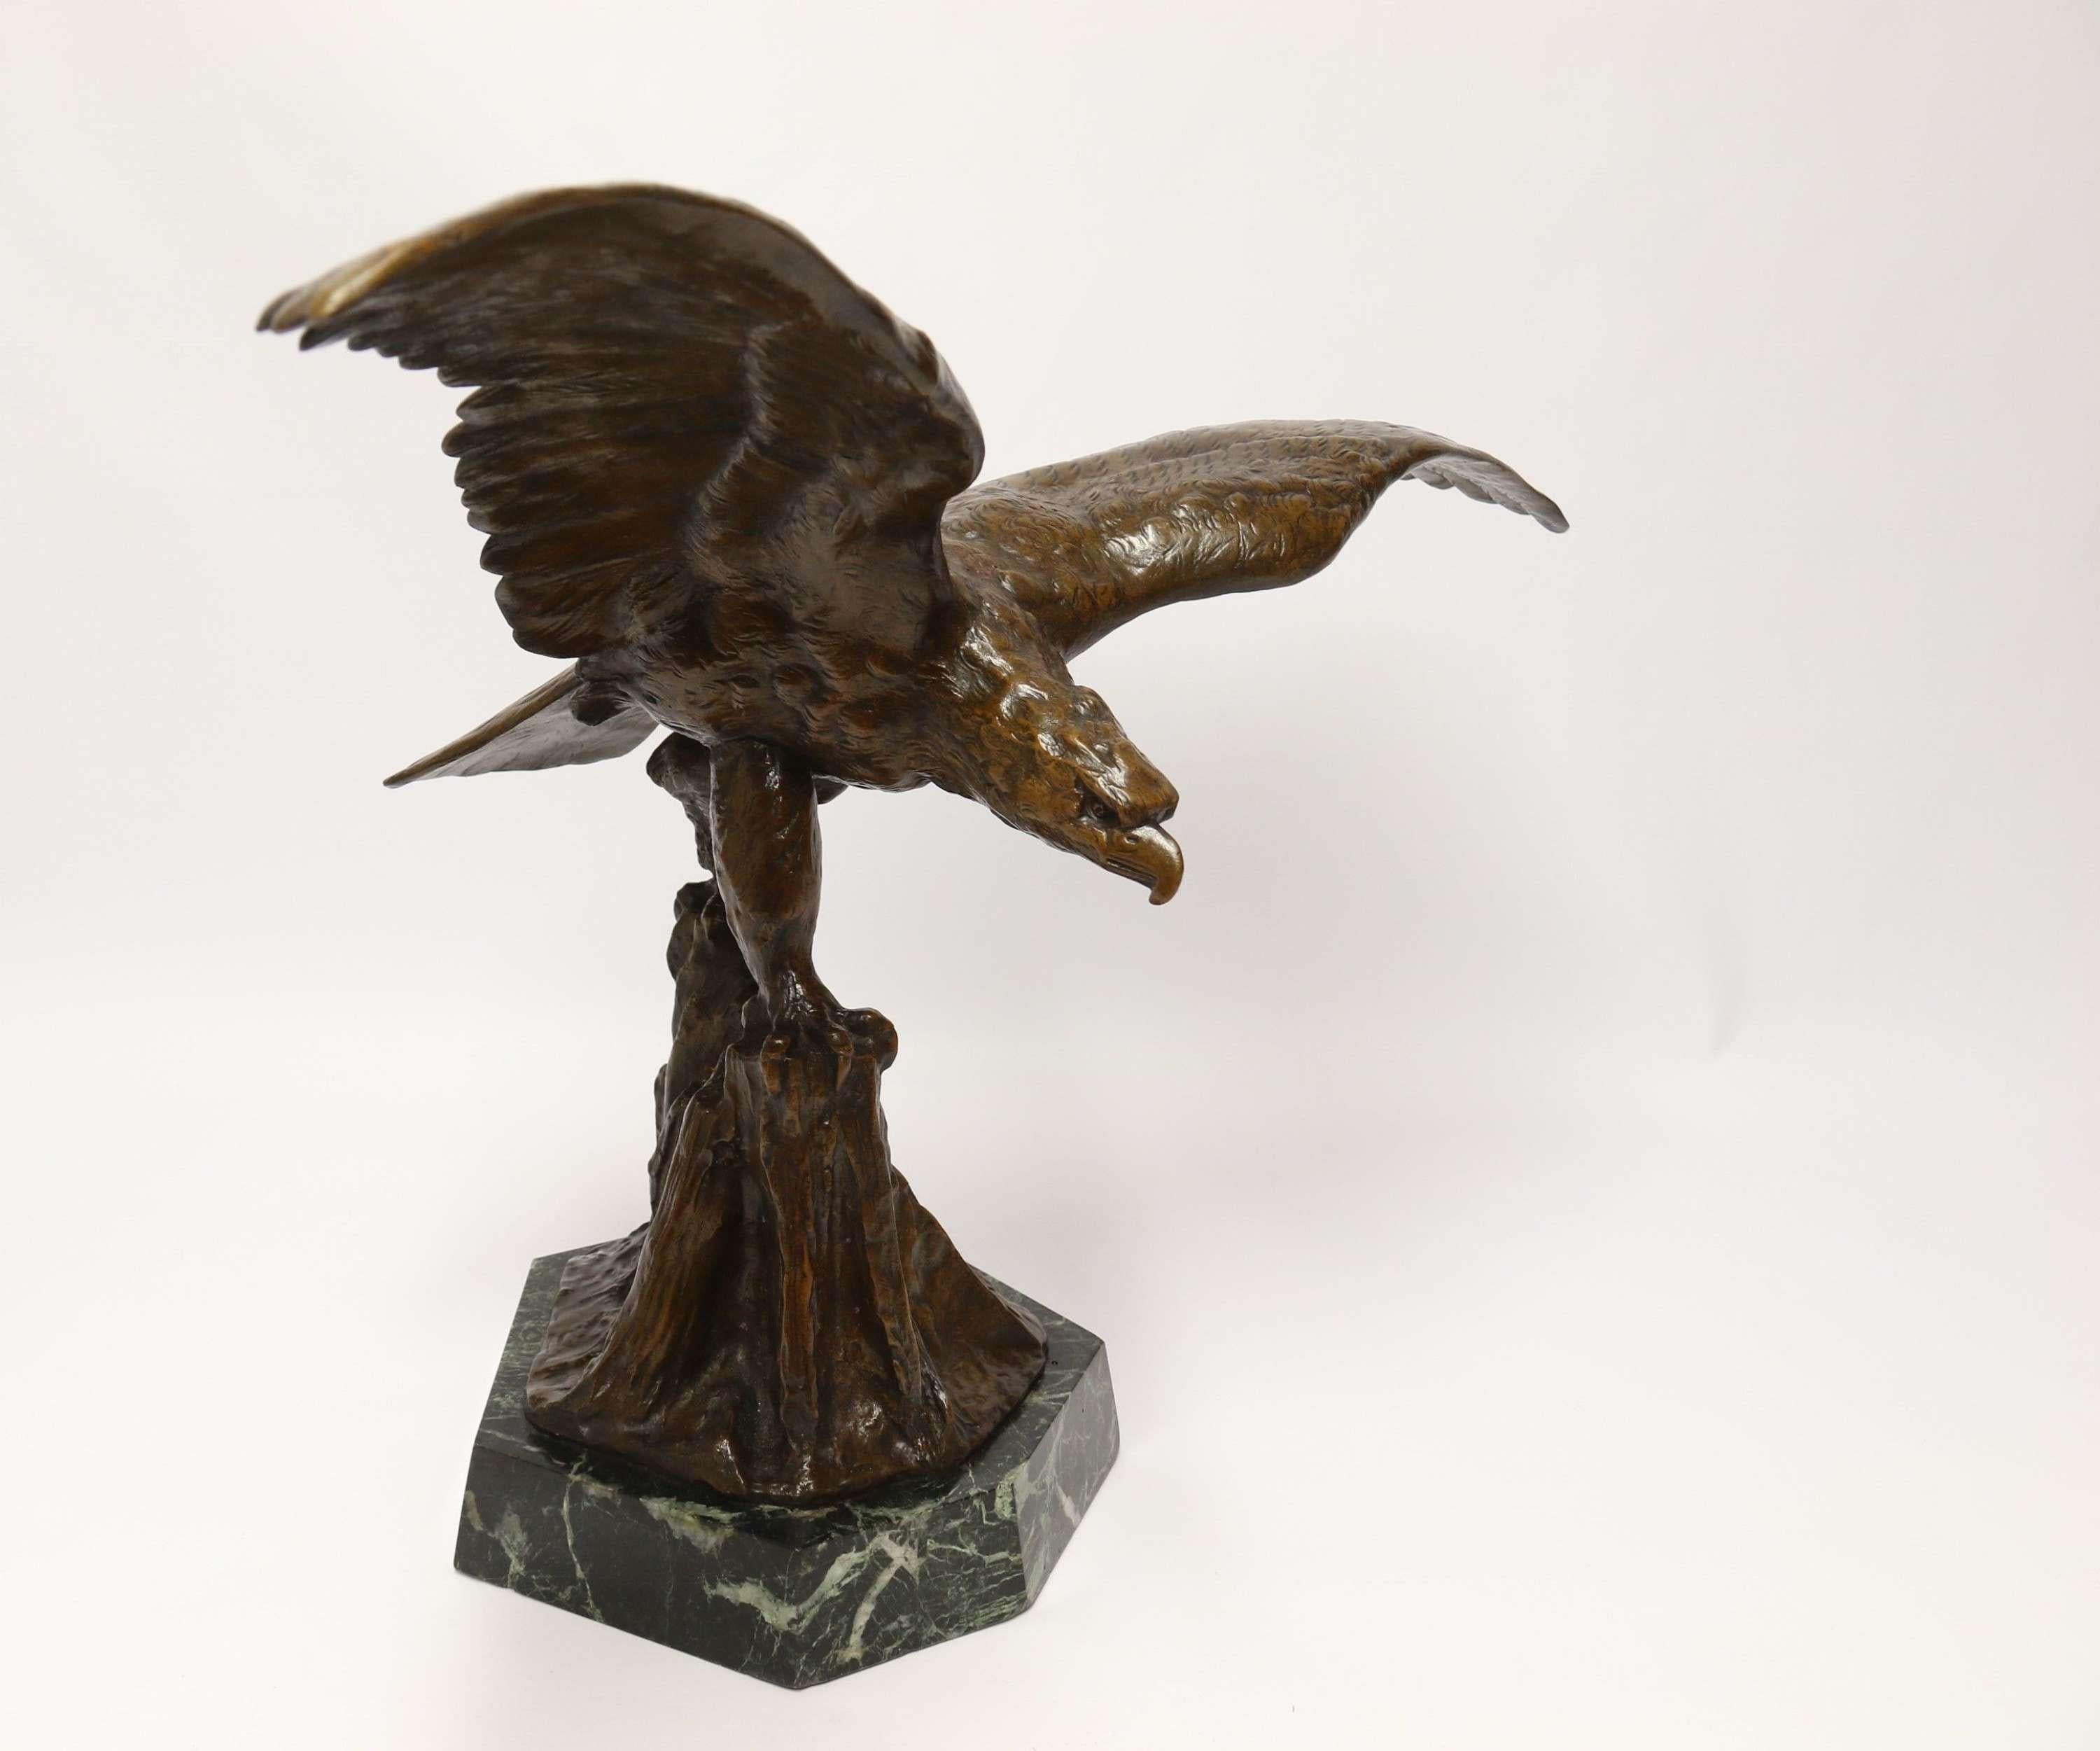 A Large and Impressive Bronze Sculpture of a Eagle by Claude Mirval

This superb and  large scale sculpture cleverly depicts an eagle with wide outspread wings having just landed on a rocky ledge. It was produced by the highly acclaimed French